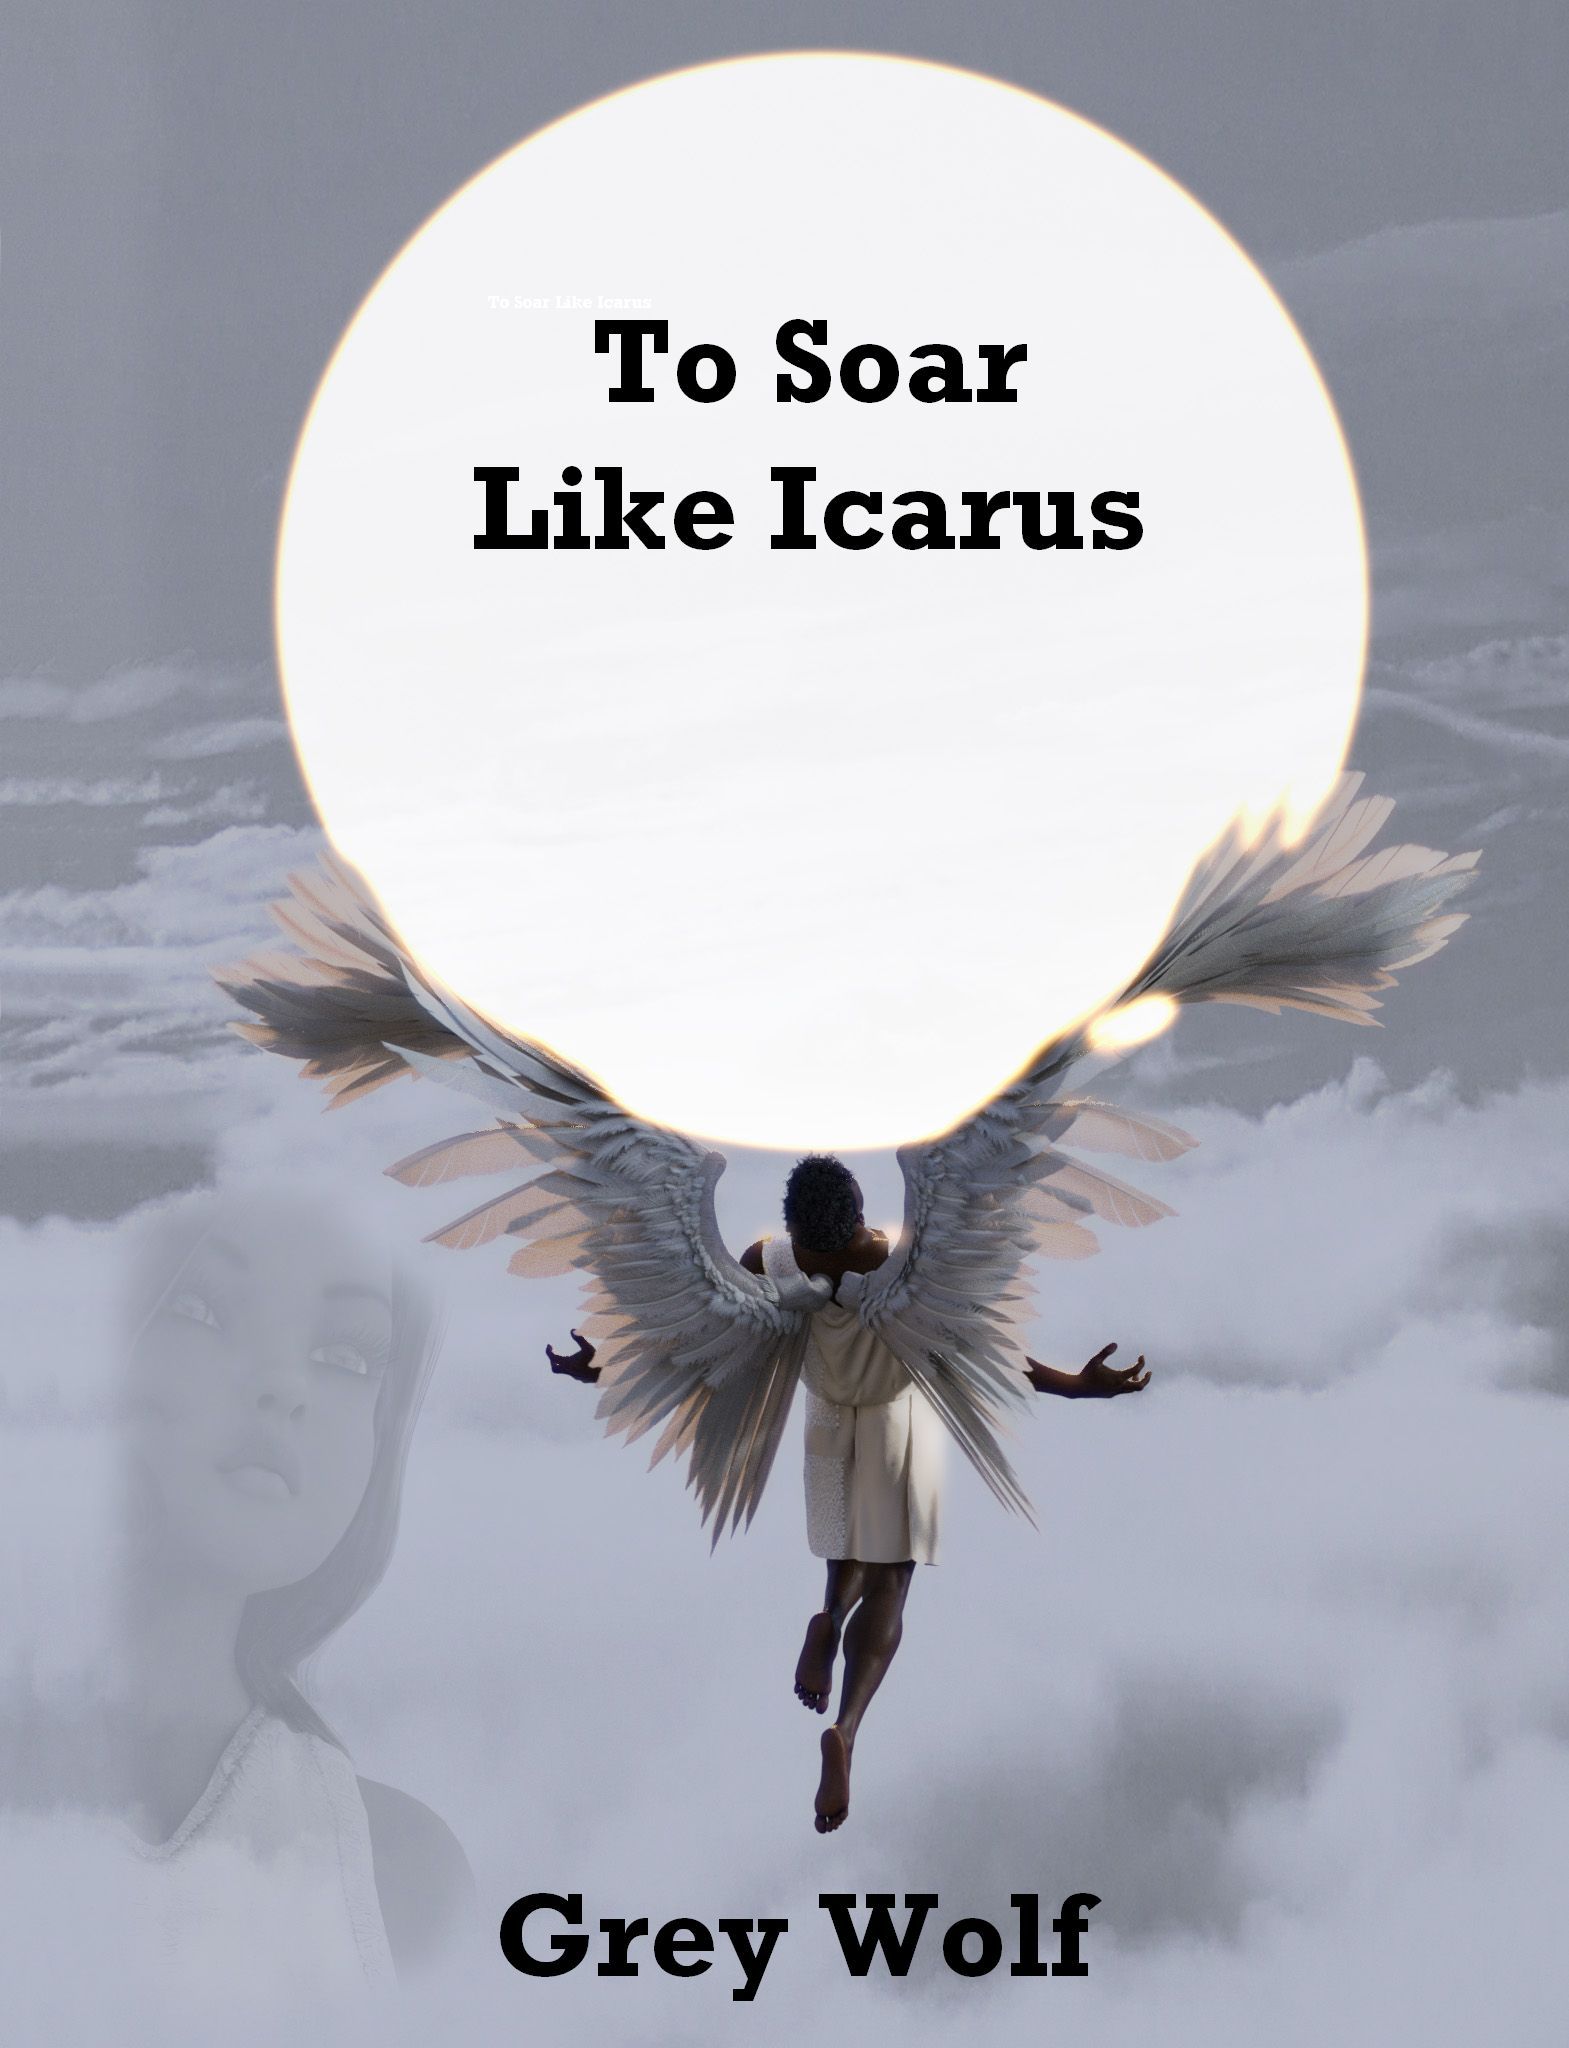 To Soar Like Icarus by Grey Wolf